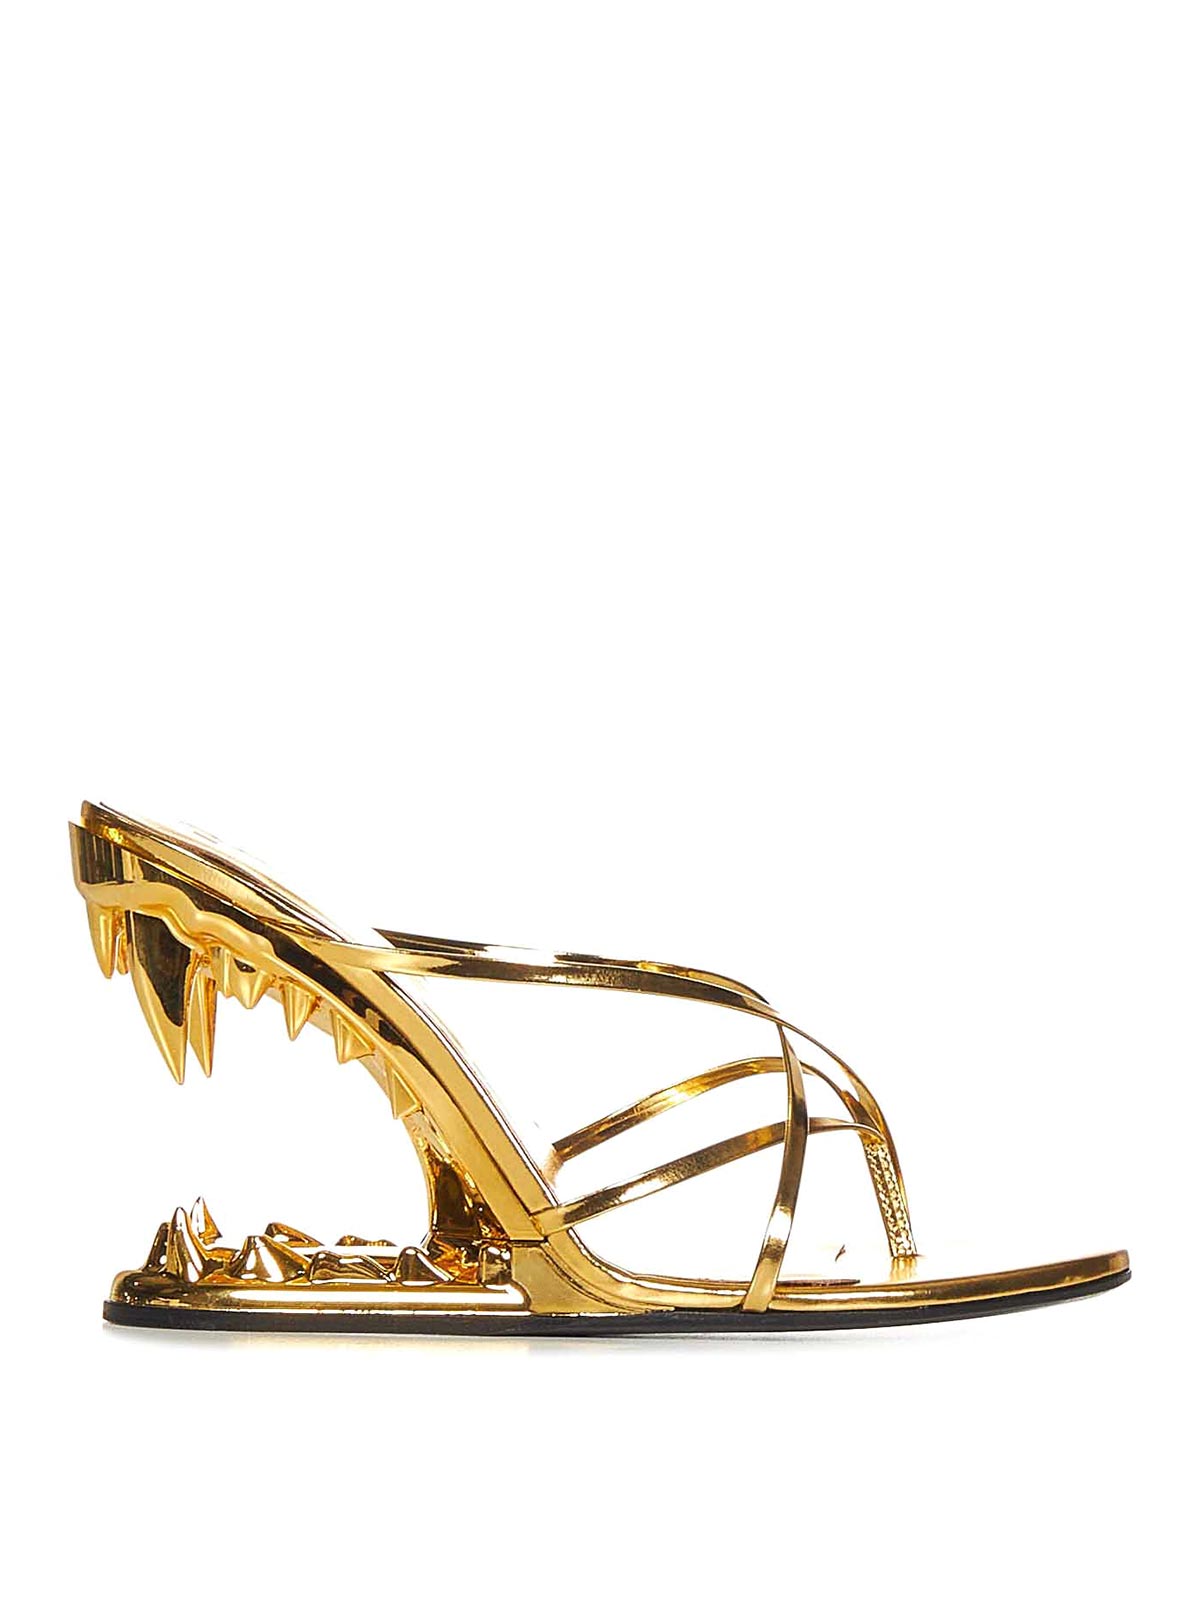 GCDS HIGH LAMINATED GOLD SANDALS WITH MORSO HEEL